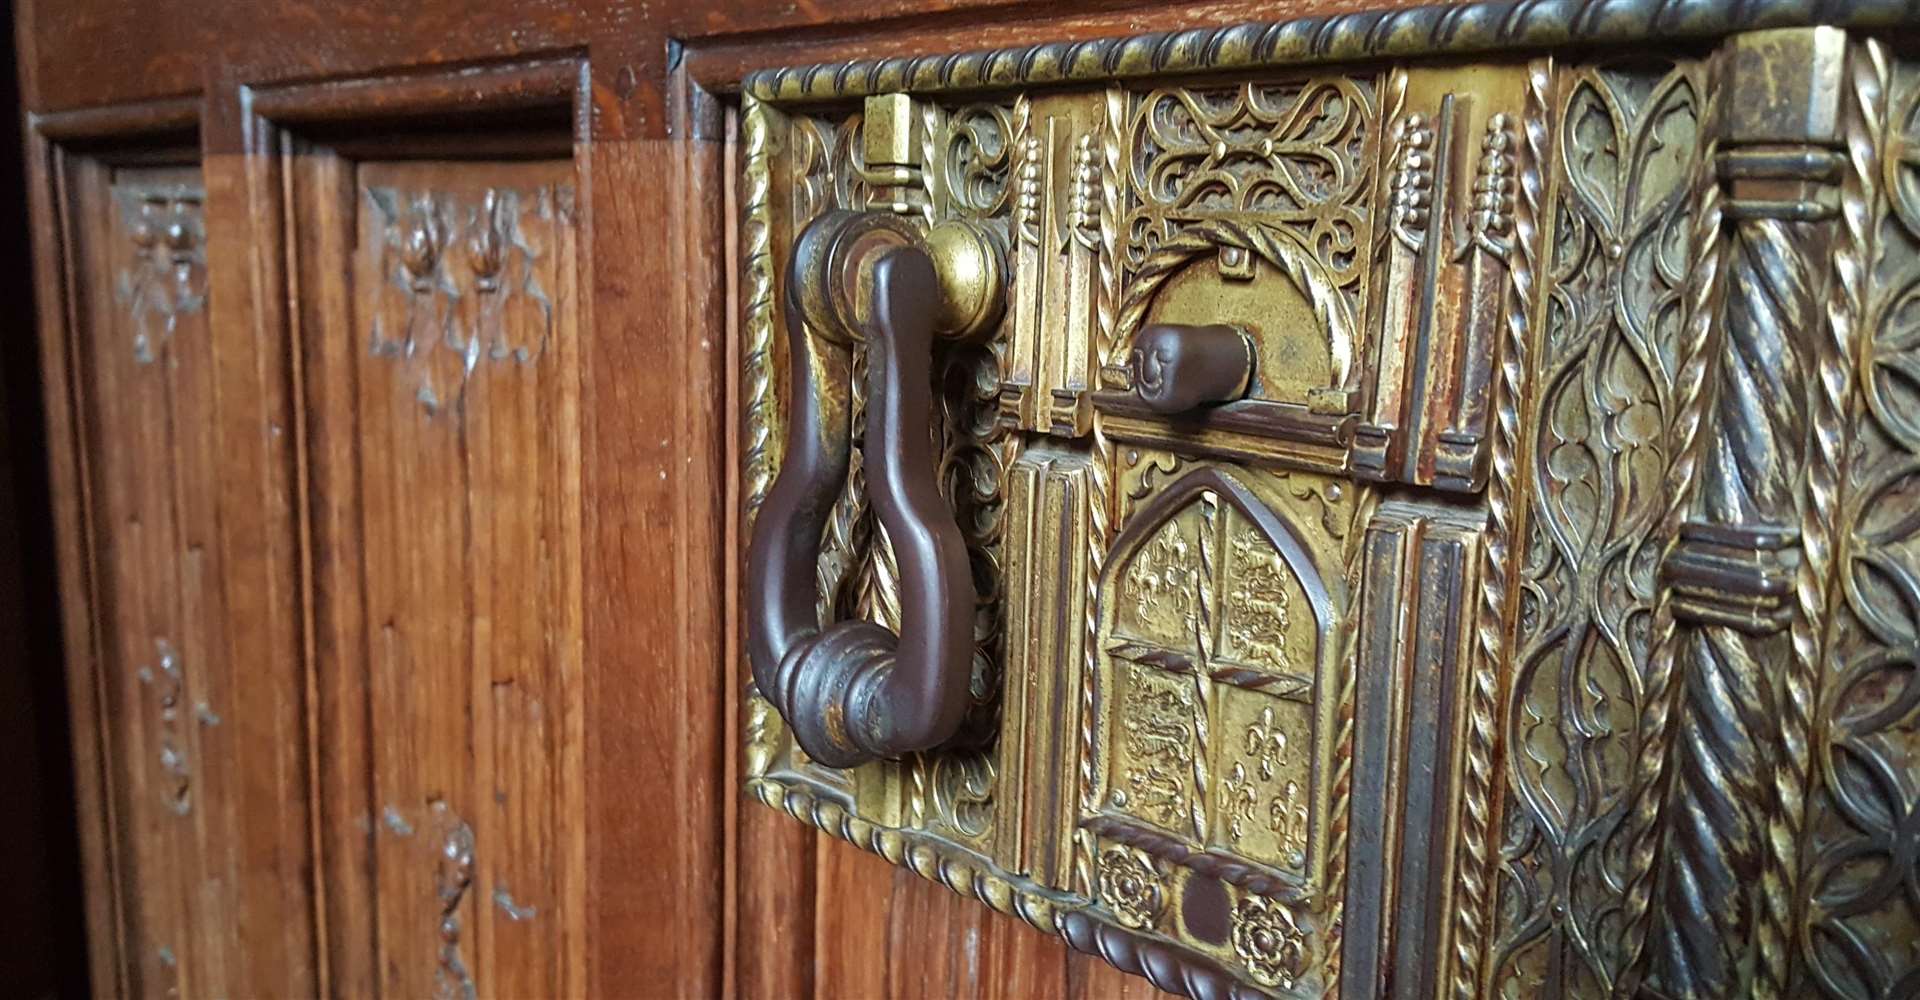 The Hidden Hever tour: is this the authentic Henry VIII lock or the copy?